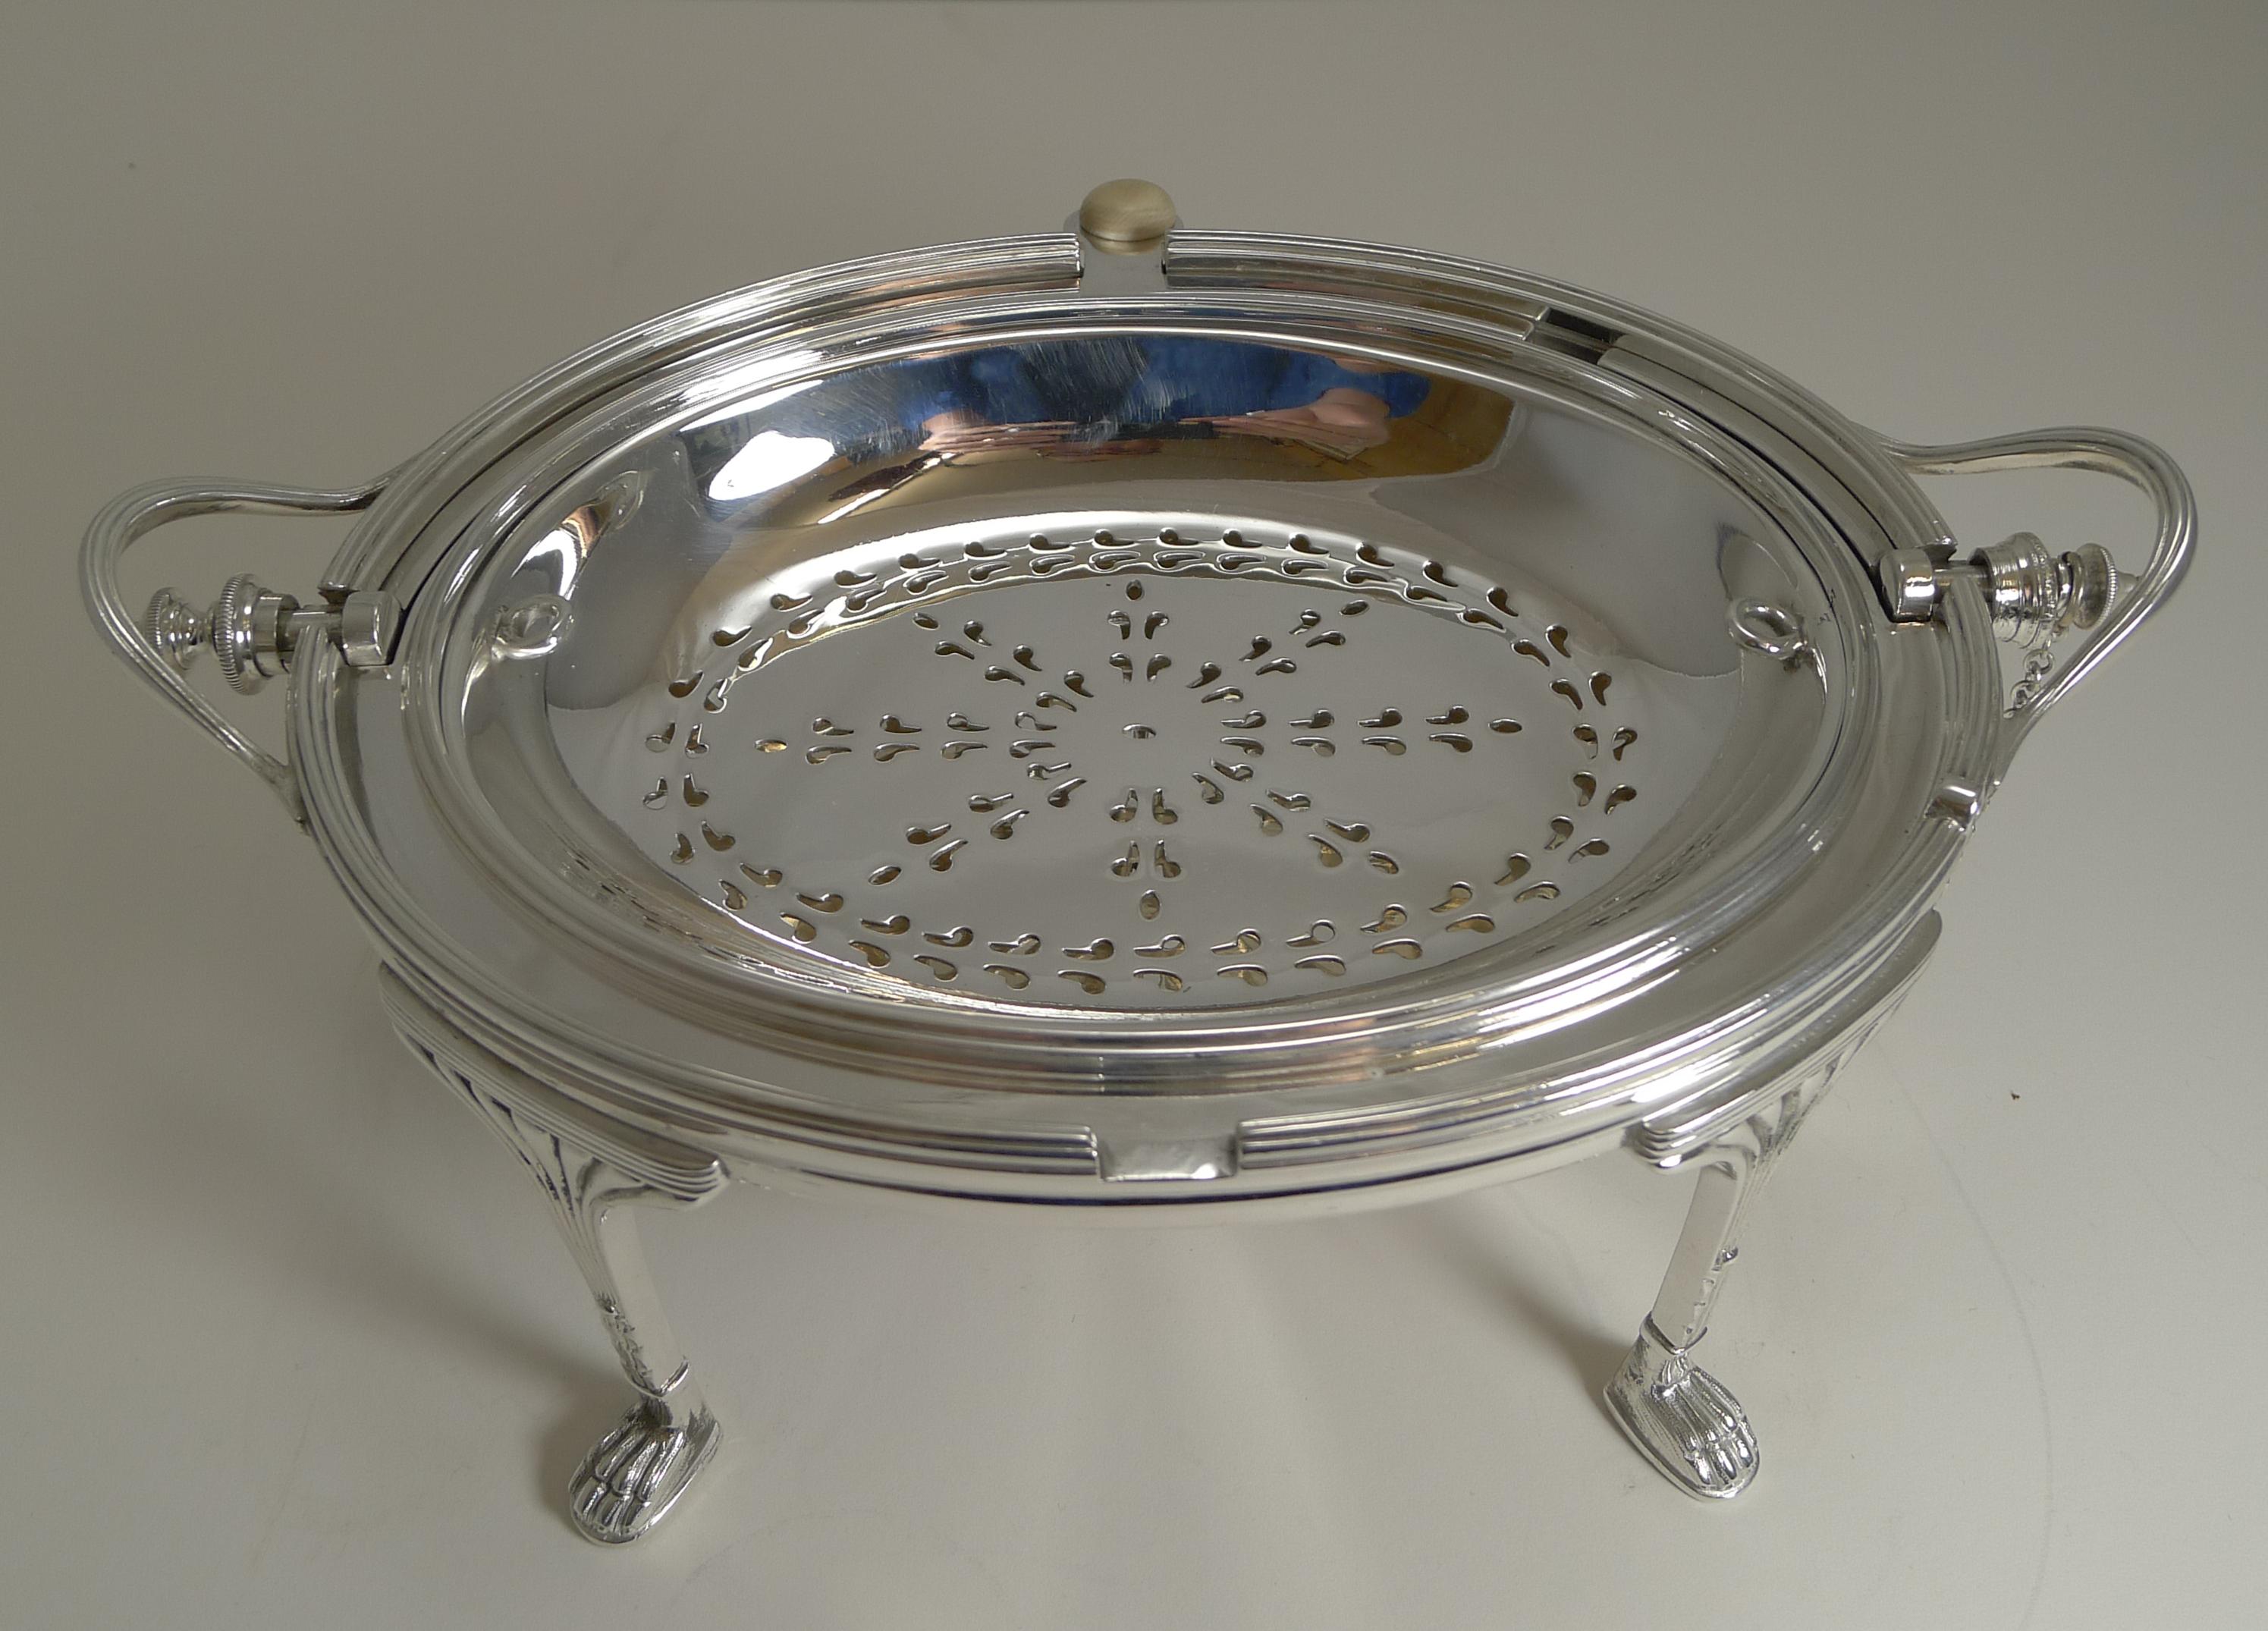 Antique English Silver Plated Revolving Breakfast / Serving Dish, Mappin & Webb 3